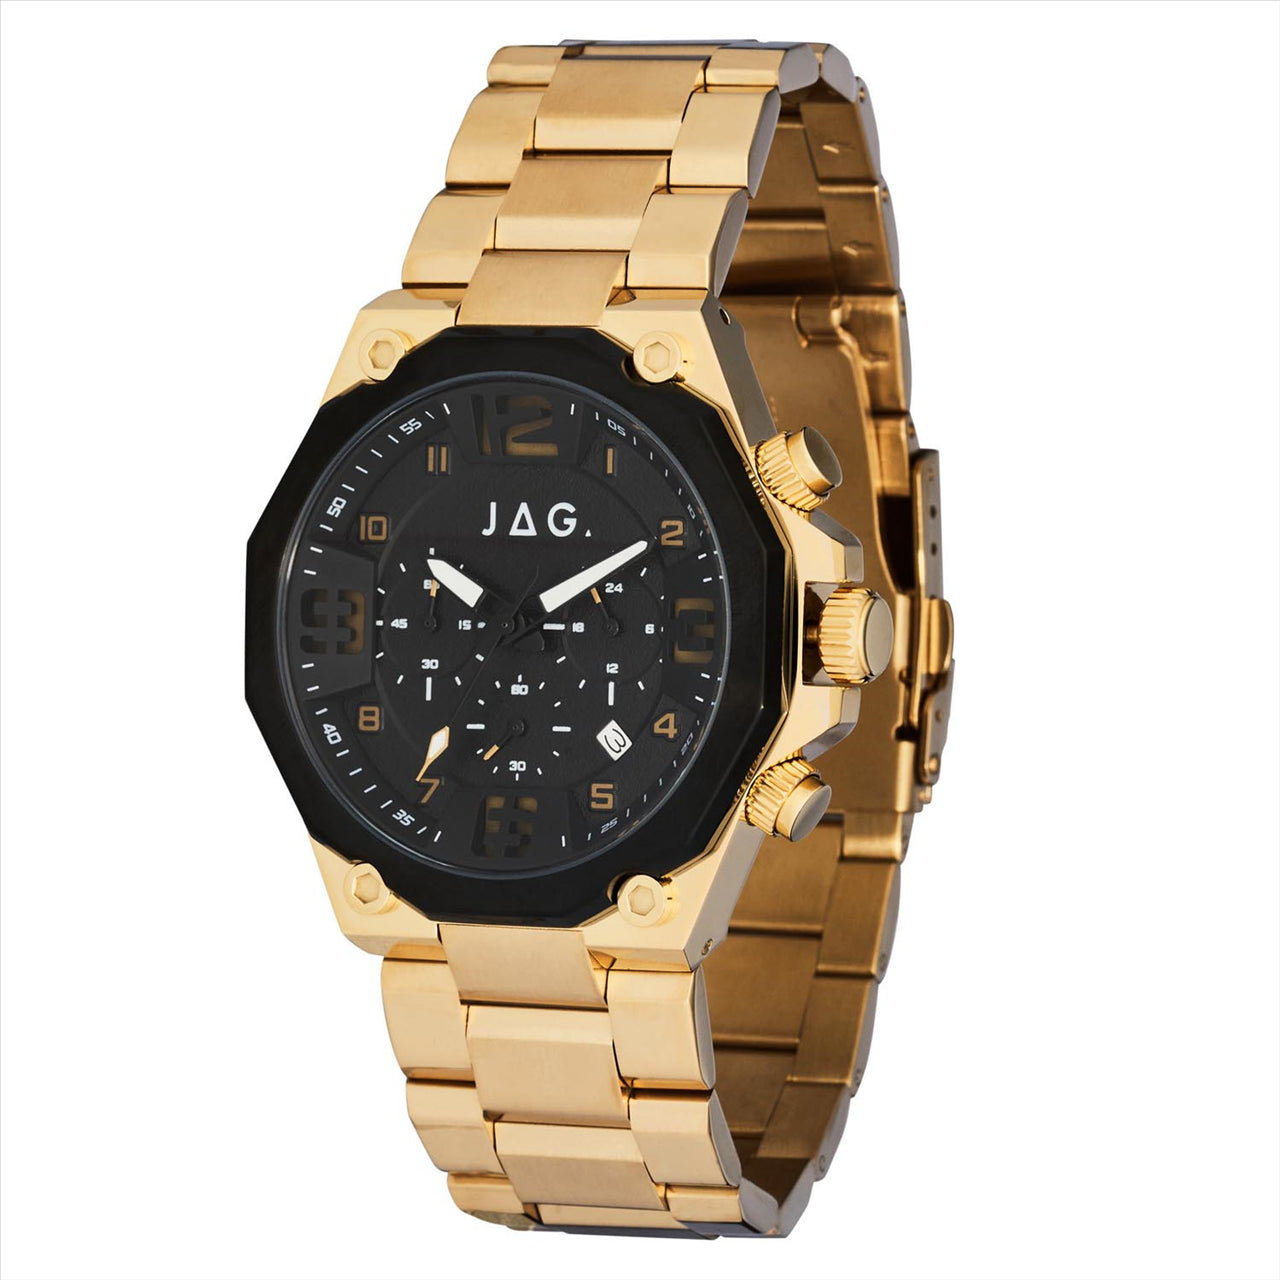 Gents Stainless Steel IP Gold Plated Case & Band Watch Baxter Blk Di Ipb 46Mm Ipb Blt